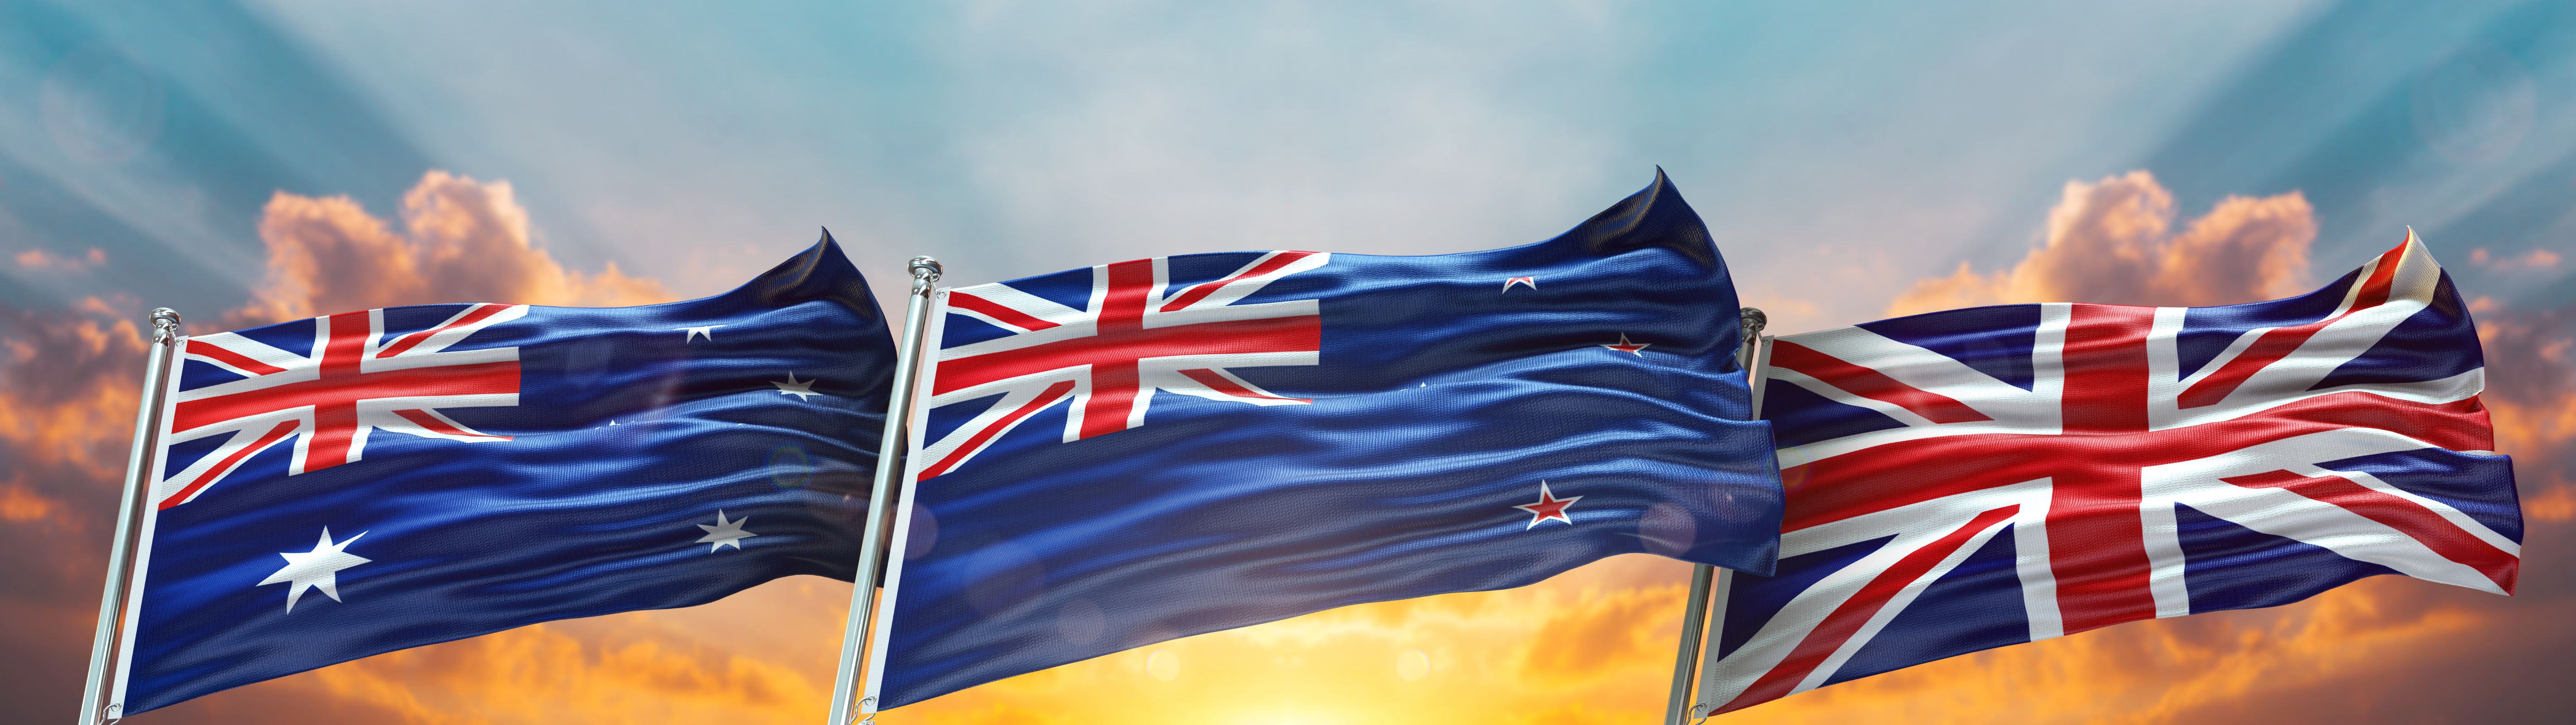 UK, New Zealand and Australia flags on flagpoles with sun lit sky behind